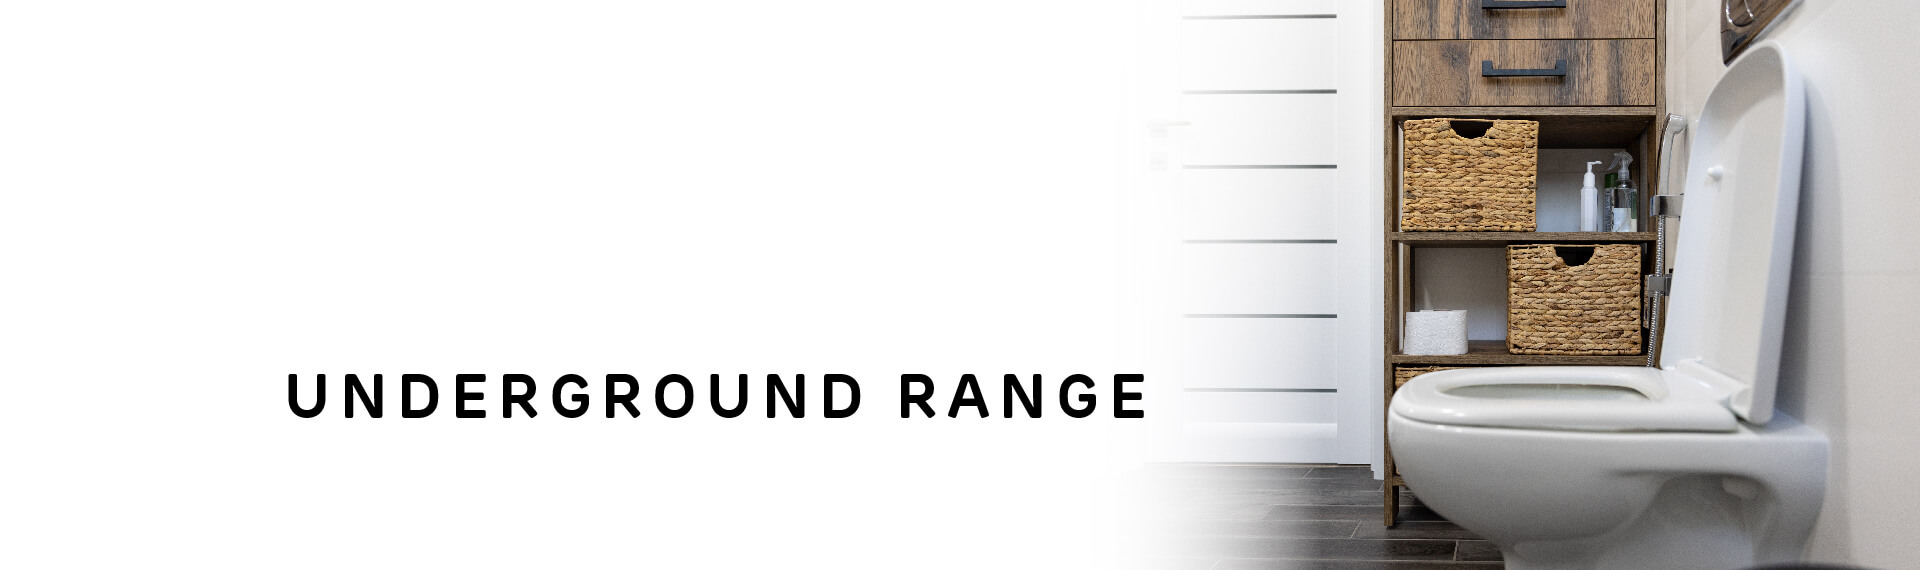 Header image with “Underground Range” in capital letters; with a photo of a pristine white toilet in a white and wood bathroom.